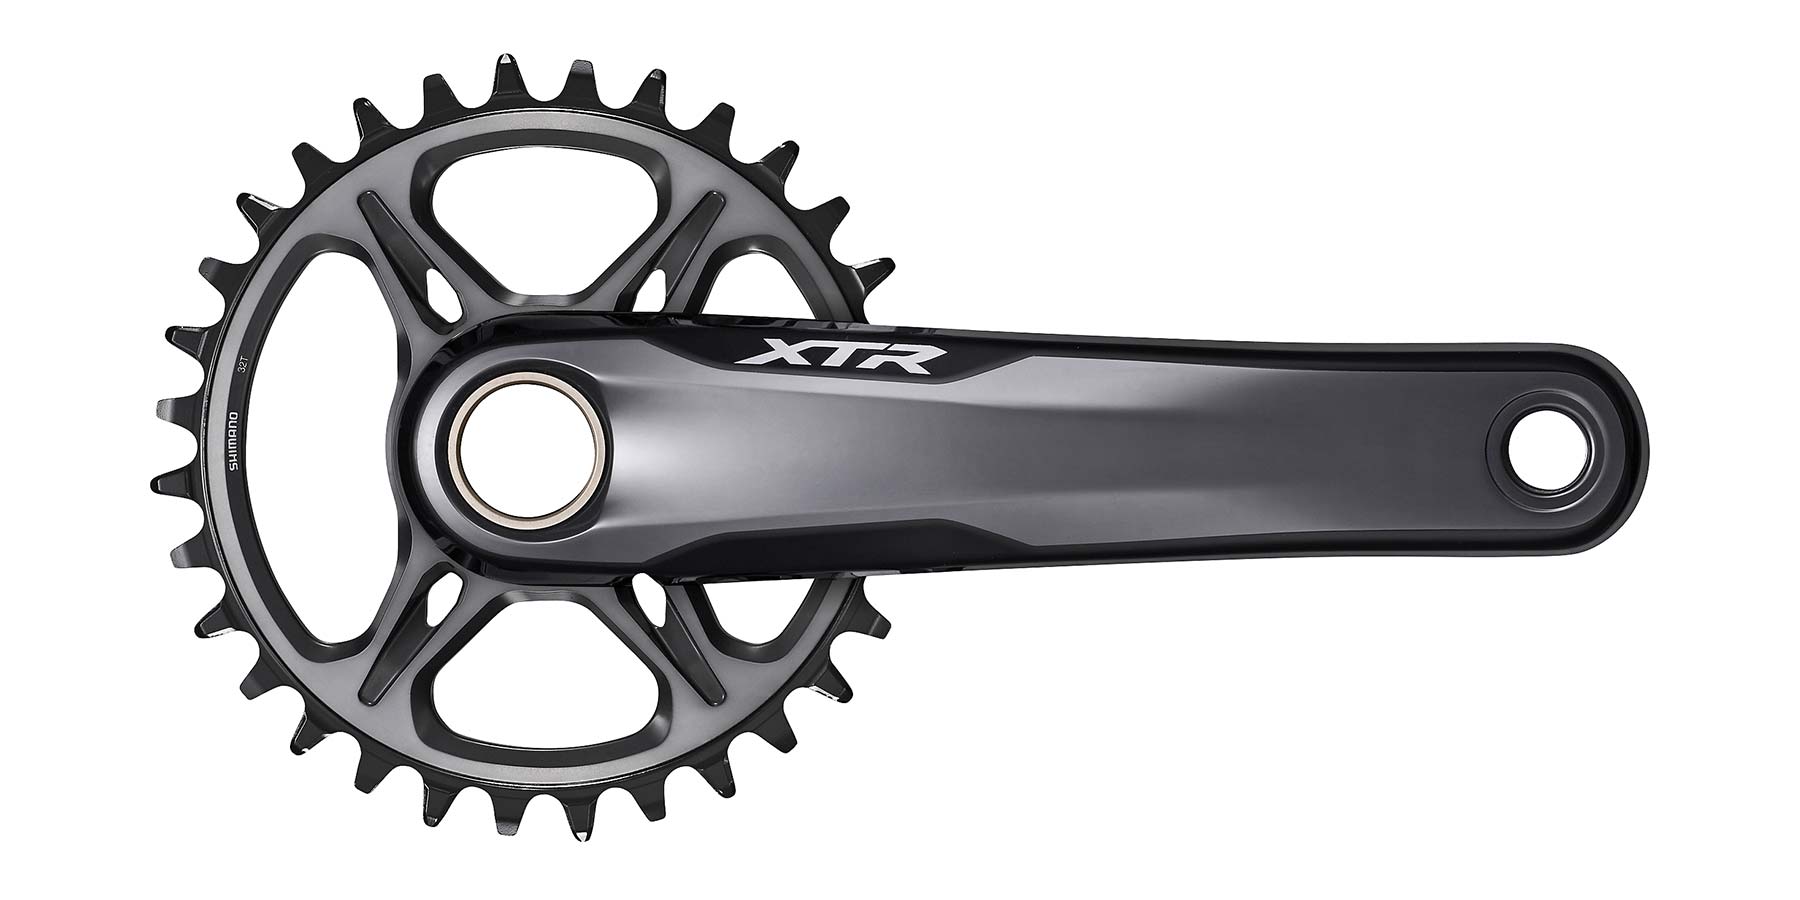 New Shimano XTR M9125 55mm chainline cranks for Boost or Super Boost?